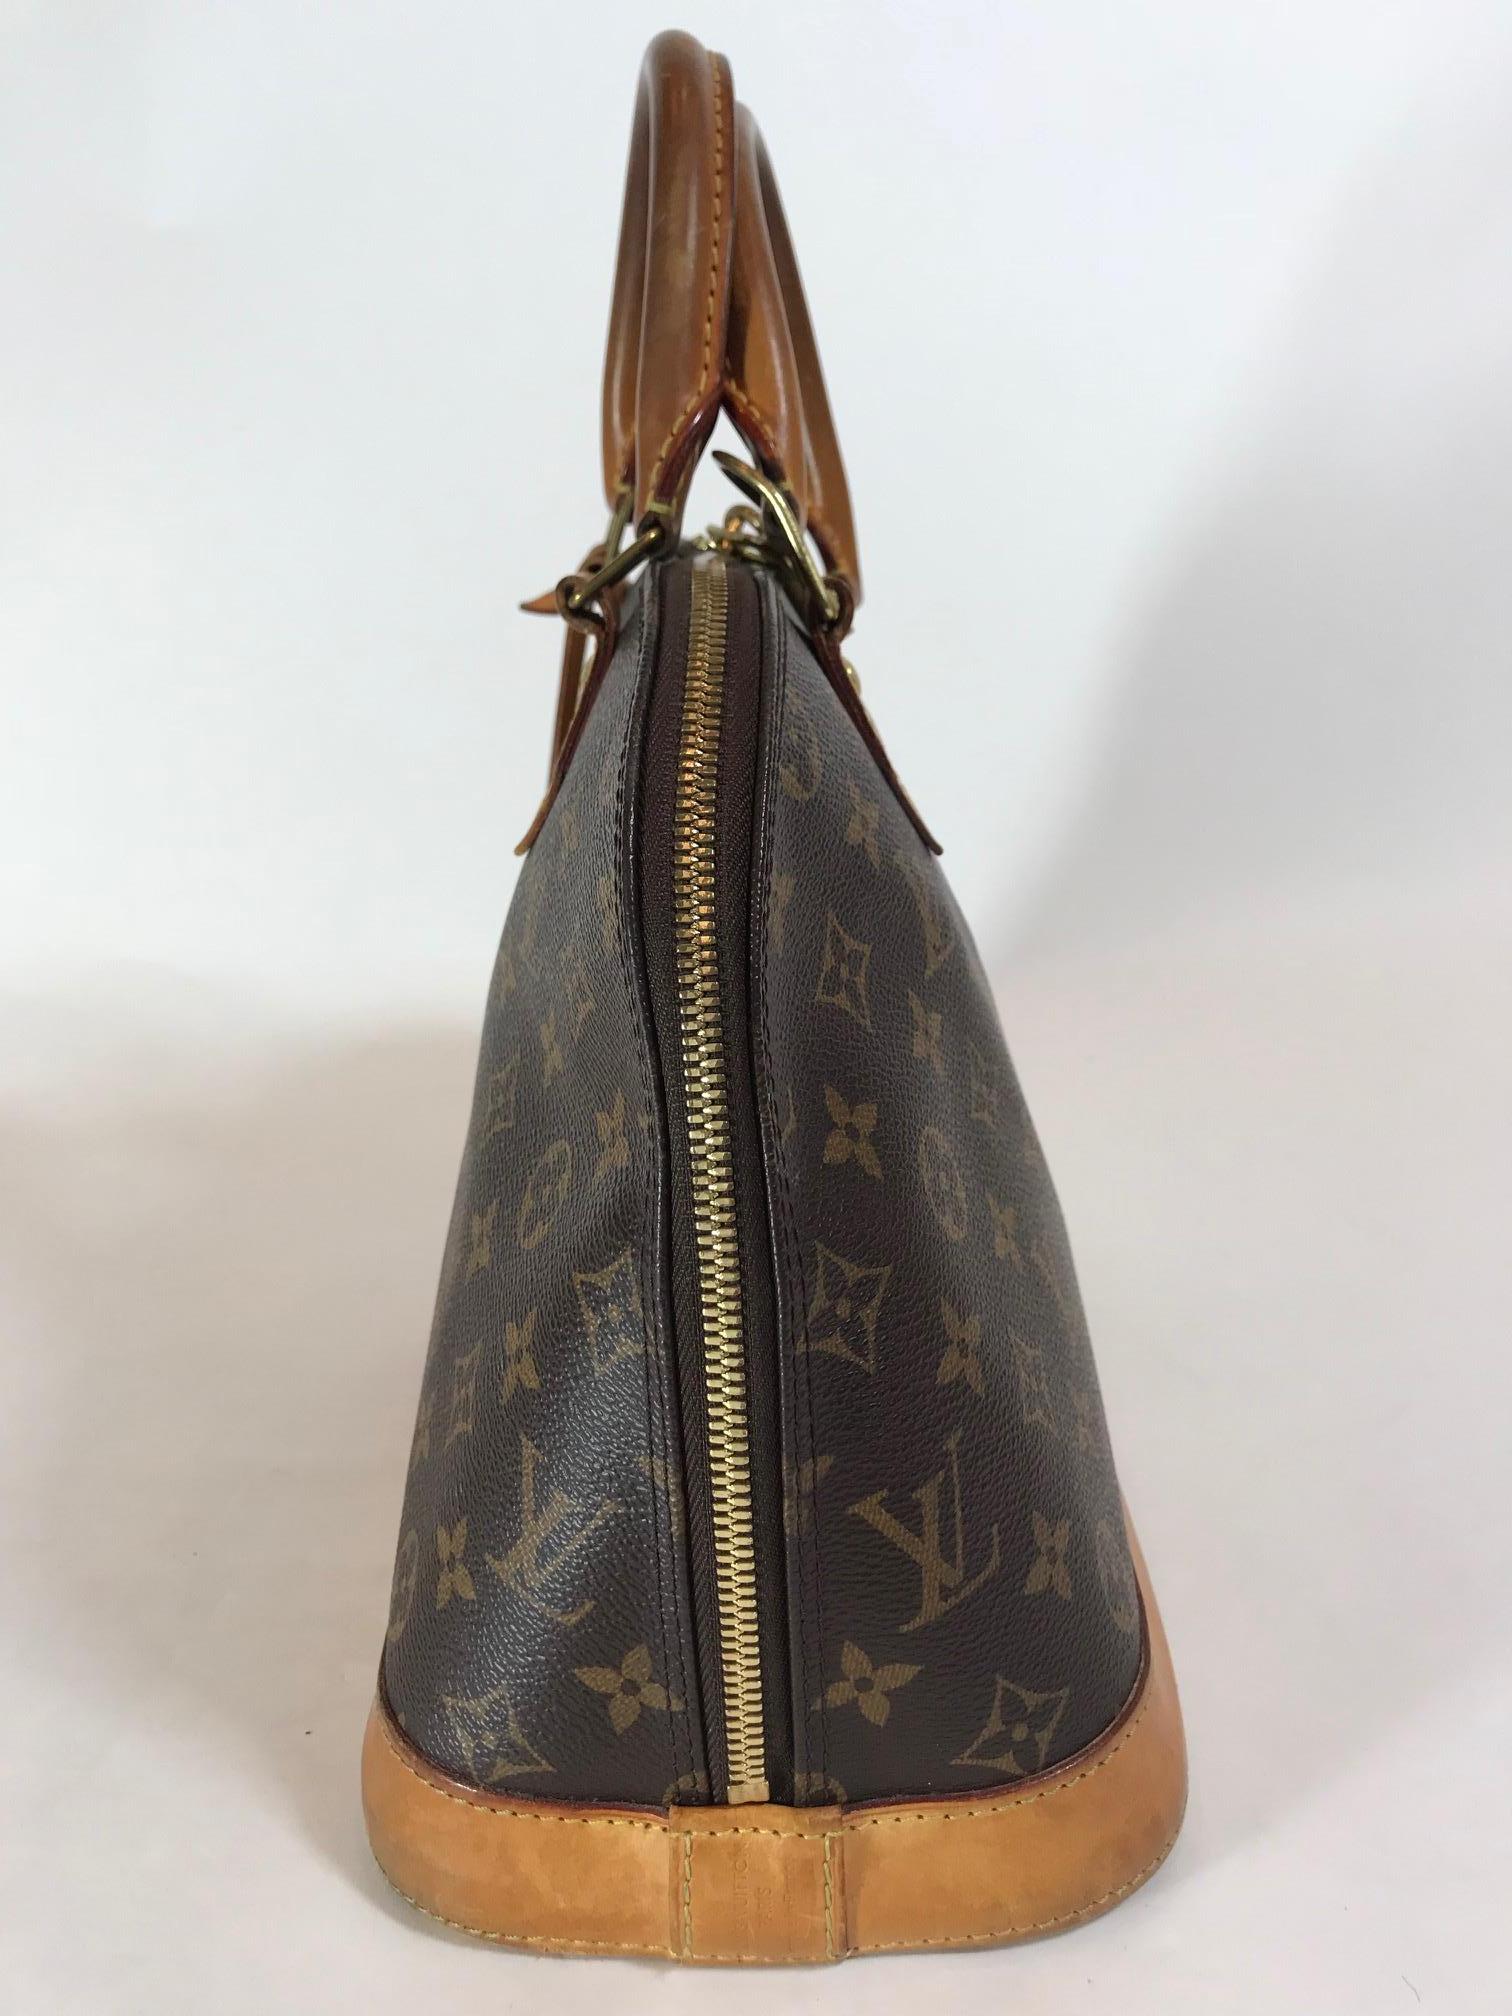 Louis Vuitton Monogram Alma PM Bag In Good Condition For Sale In Roslyn, NY